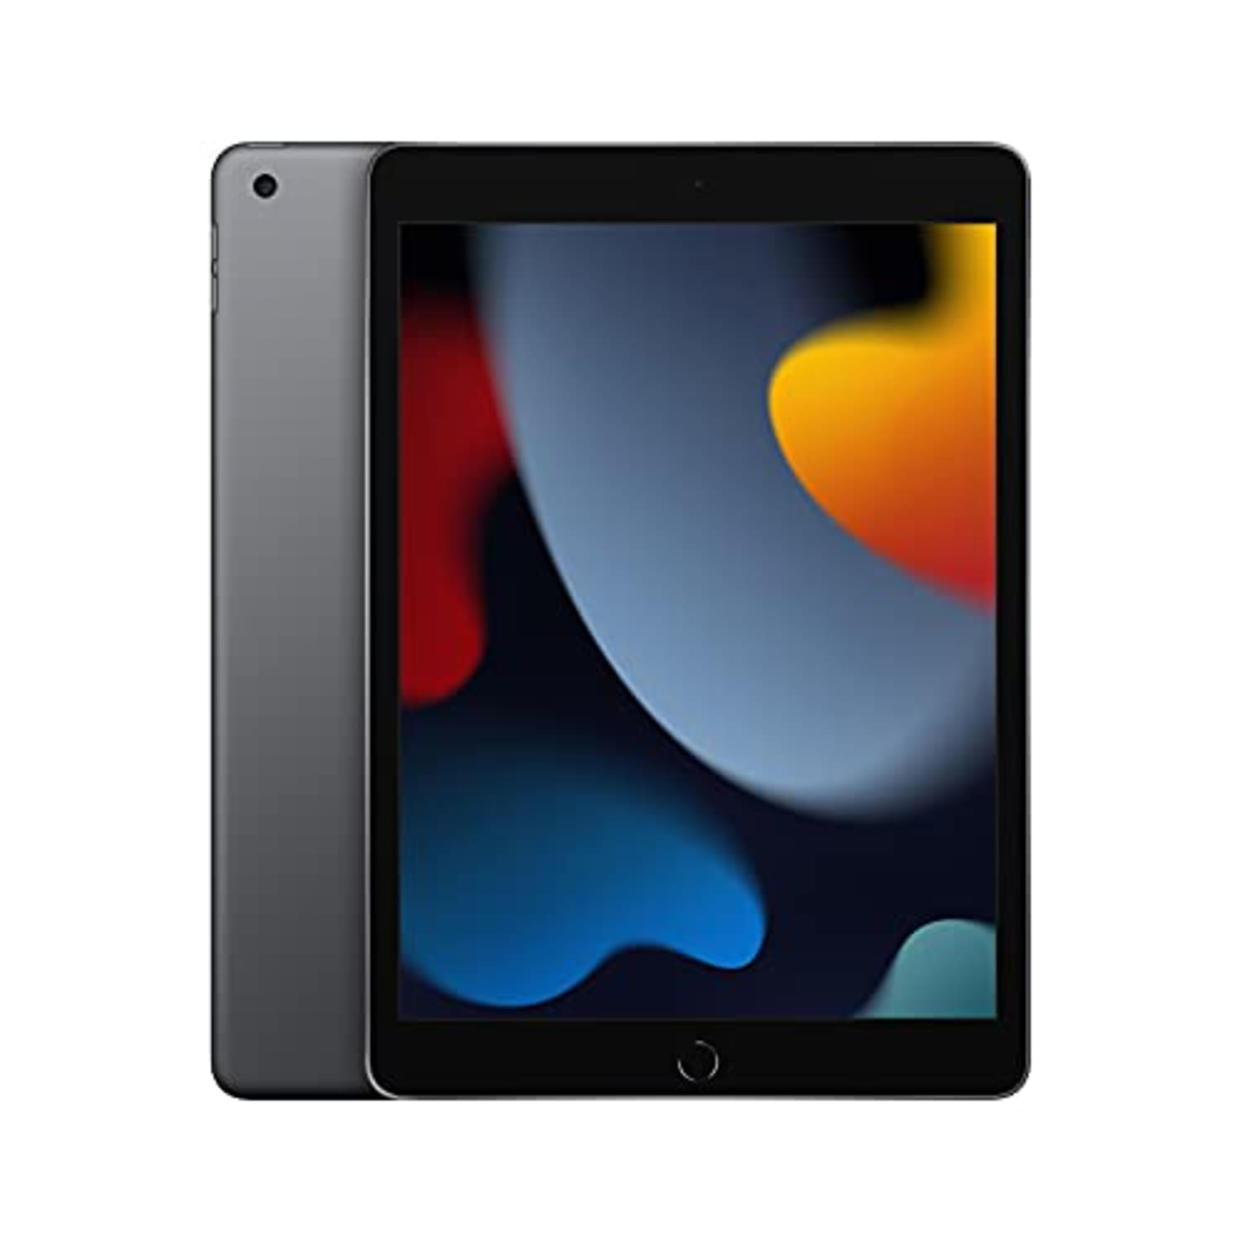 Apple iPad (9th Generation): with A13 Bionic chip, 10.2-inch Retina Display, 64GB, Wi-Fi, 12MP front/8MP Back Camera, Touch ID, All-Day Battery Life – Space Gray (AMAZON)